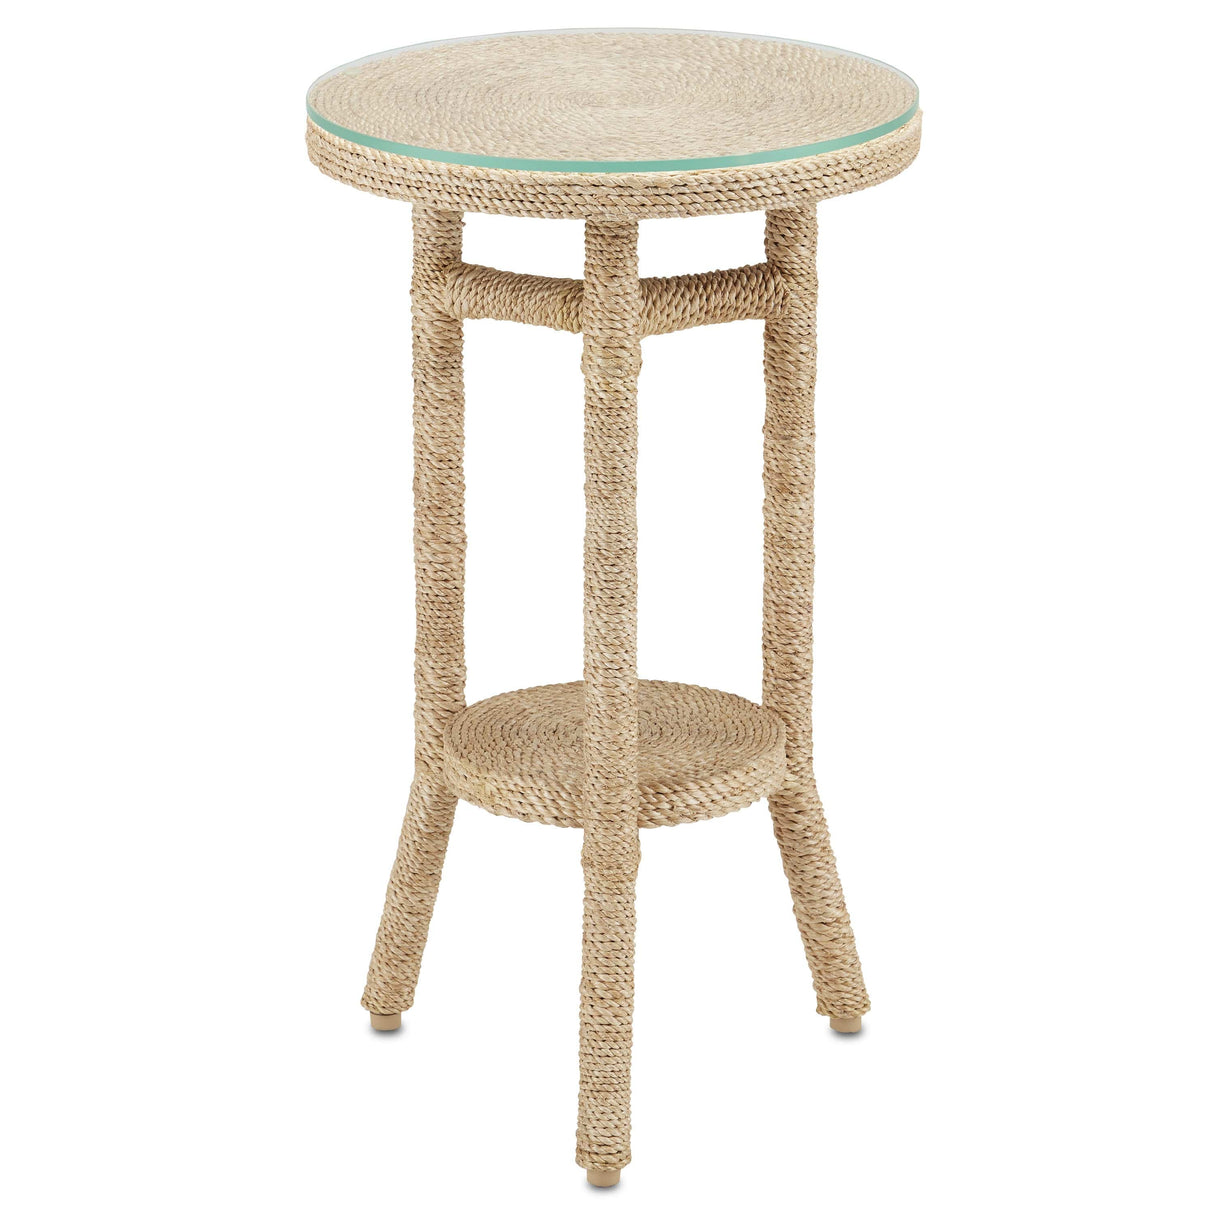 Currey and Company Limay Drinks Table Furniture currey-co-3000-0214